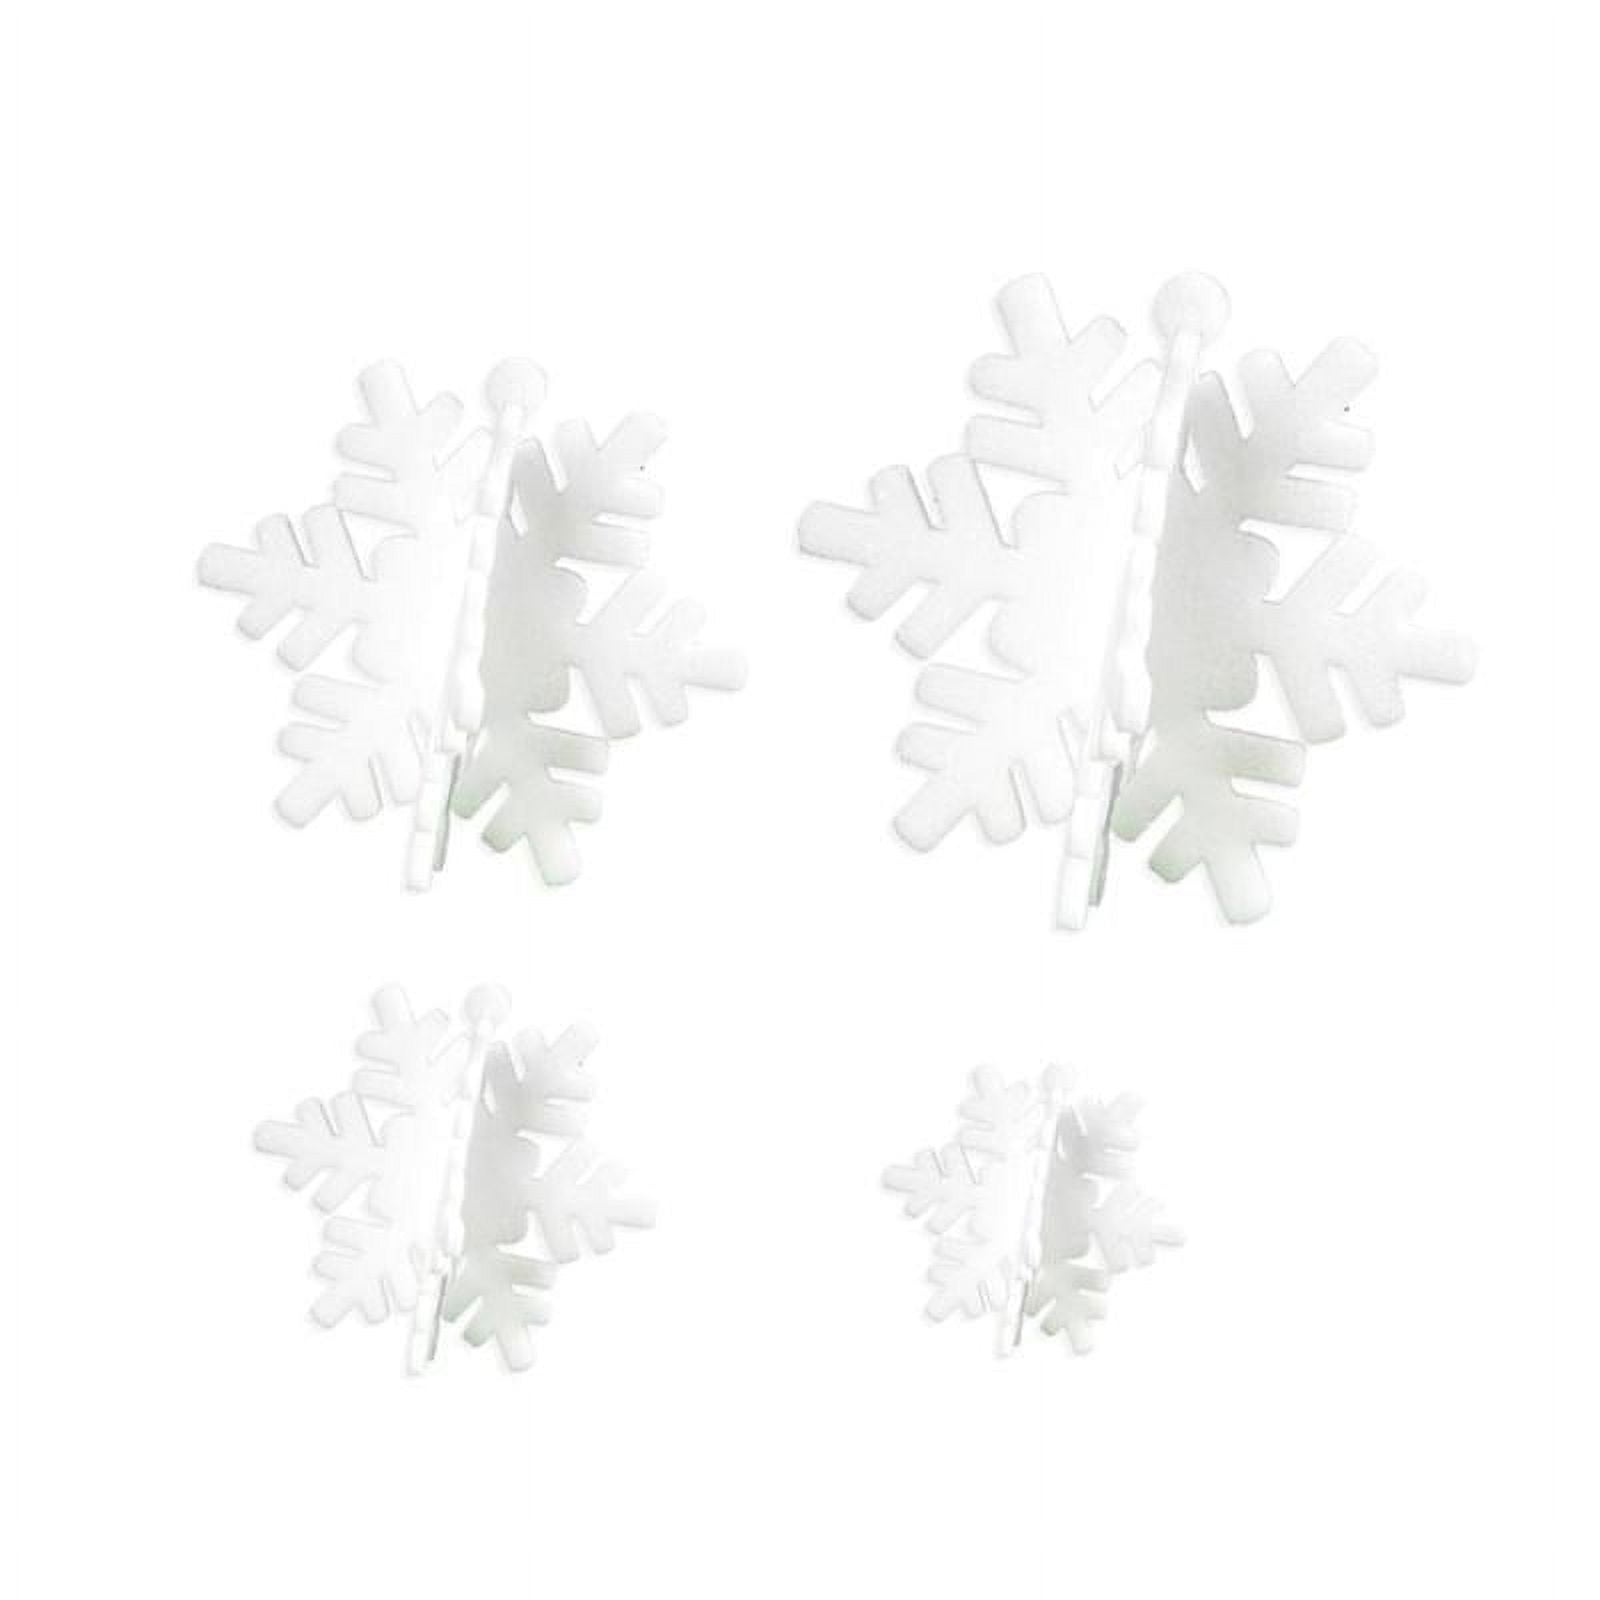 4 Pack White Foam 3D Snowflakes Pendant Window Clings Decals Stickers  Christmas Winter Wonderland Decor Ornaments Party Supplies 